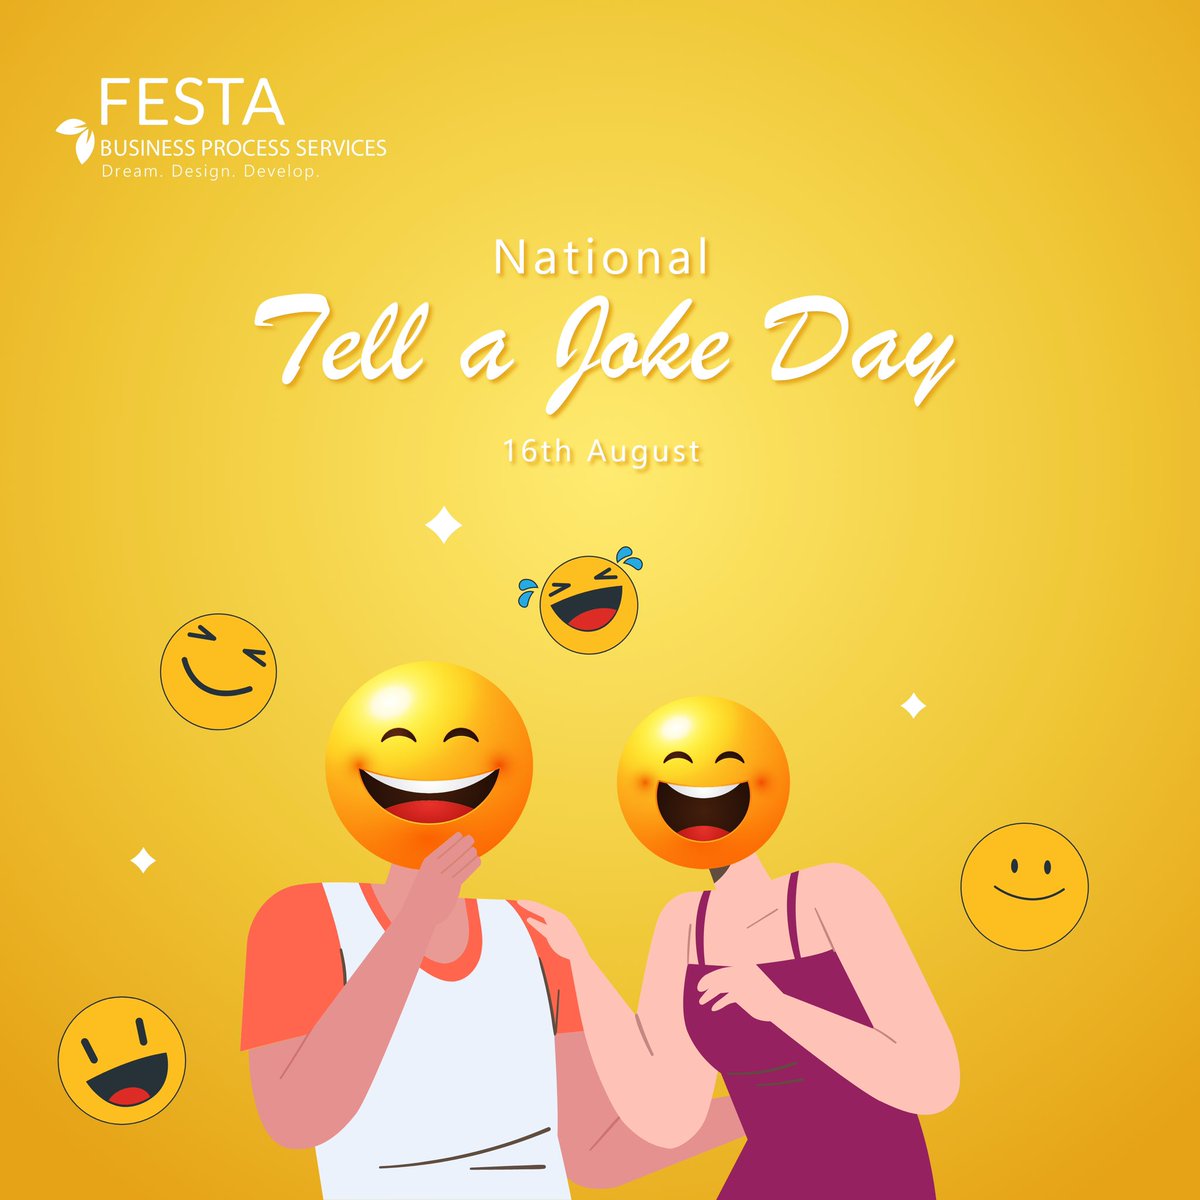 😄🎉 It's #NationalTellAJokeDay! 😂🎈 Share the laughter, spread the smiles, and brighten someone's day with a good ol' joke. Let's celebrate the power of humor to connect us all. Ready, set, go—let the joke-telling begin! 🎁🤣 #ShareTheLaughter #JokeTime 🌟🌈